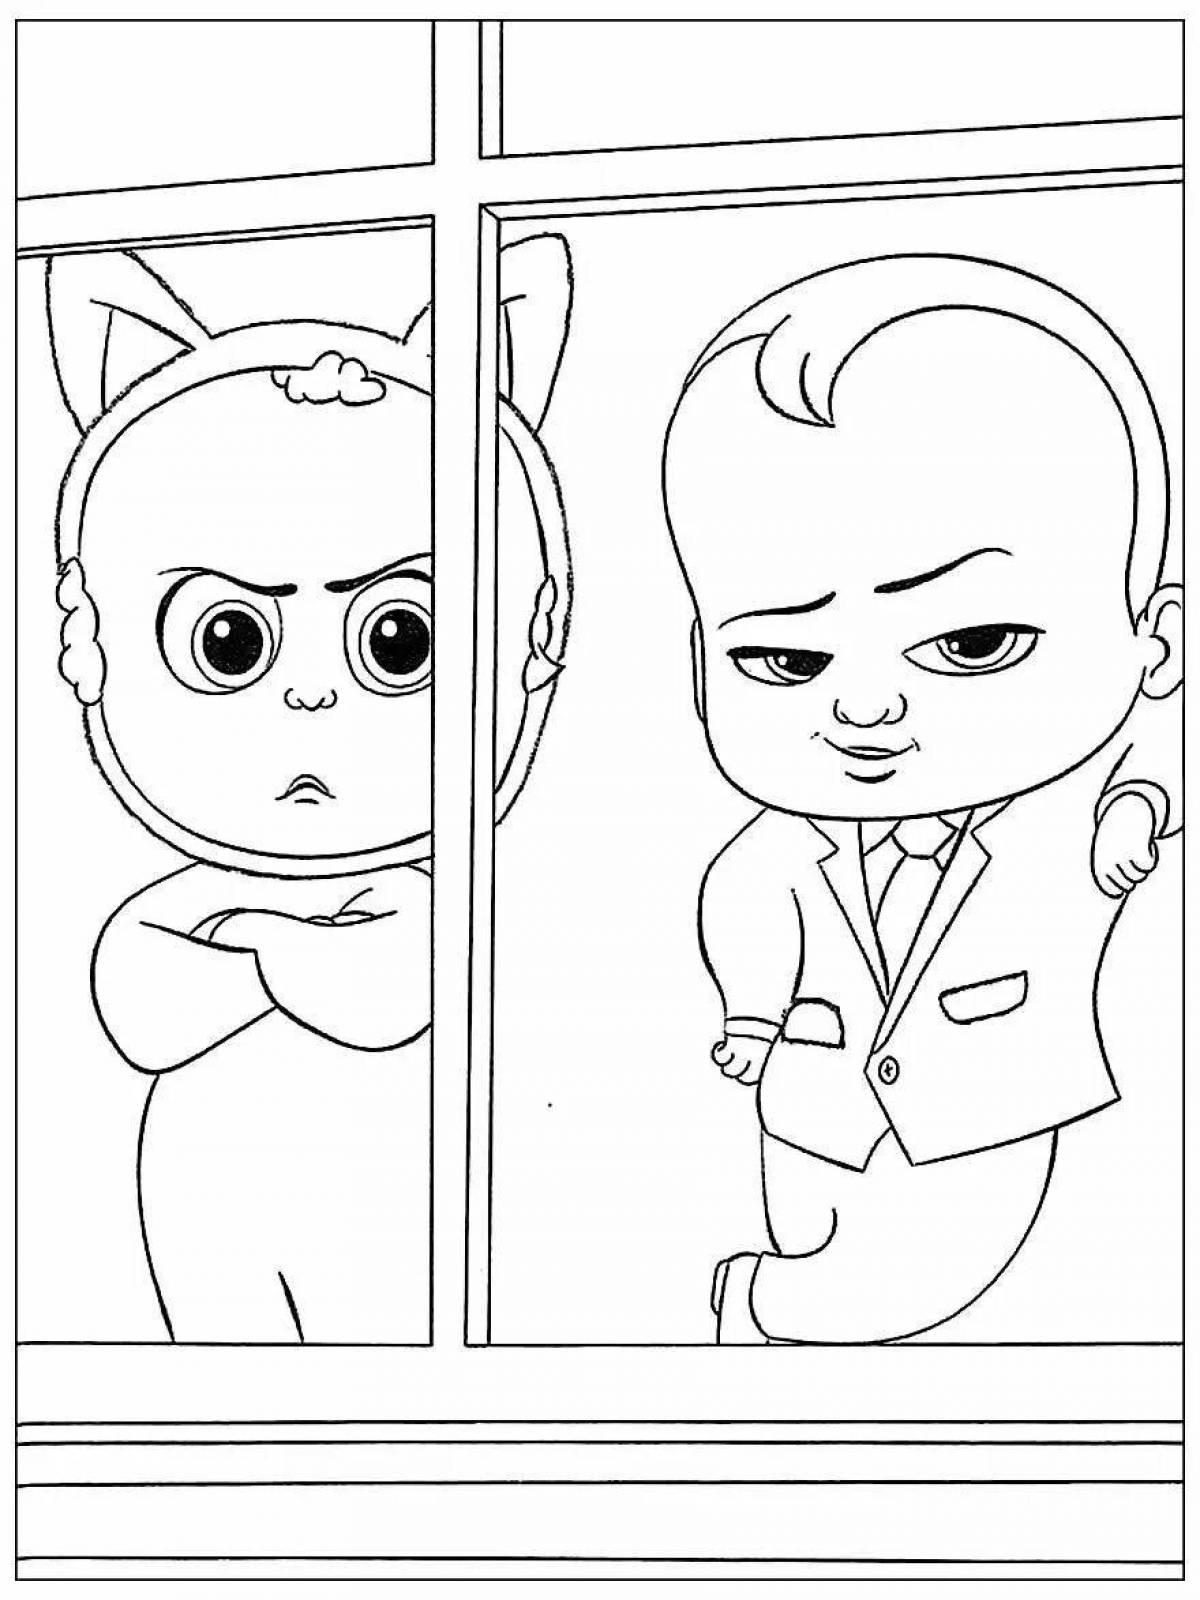 Attractive coloring boss baby figure